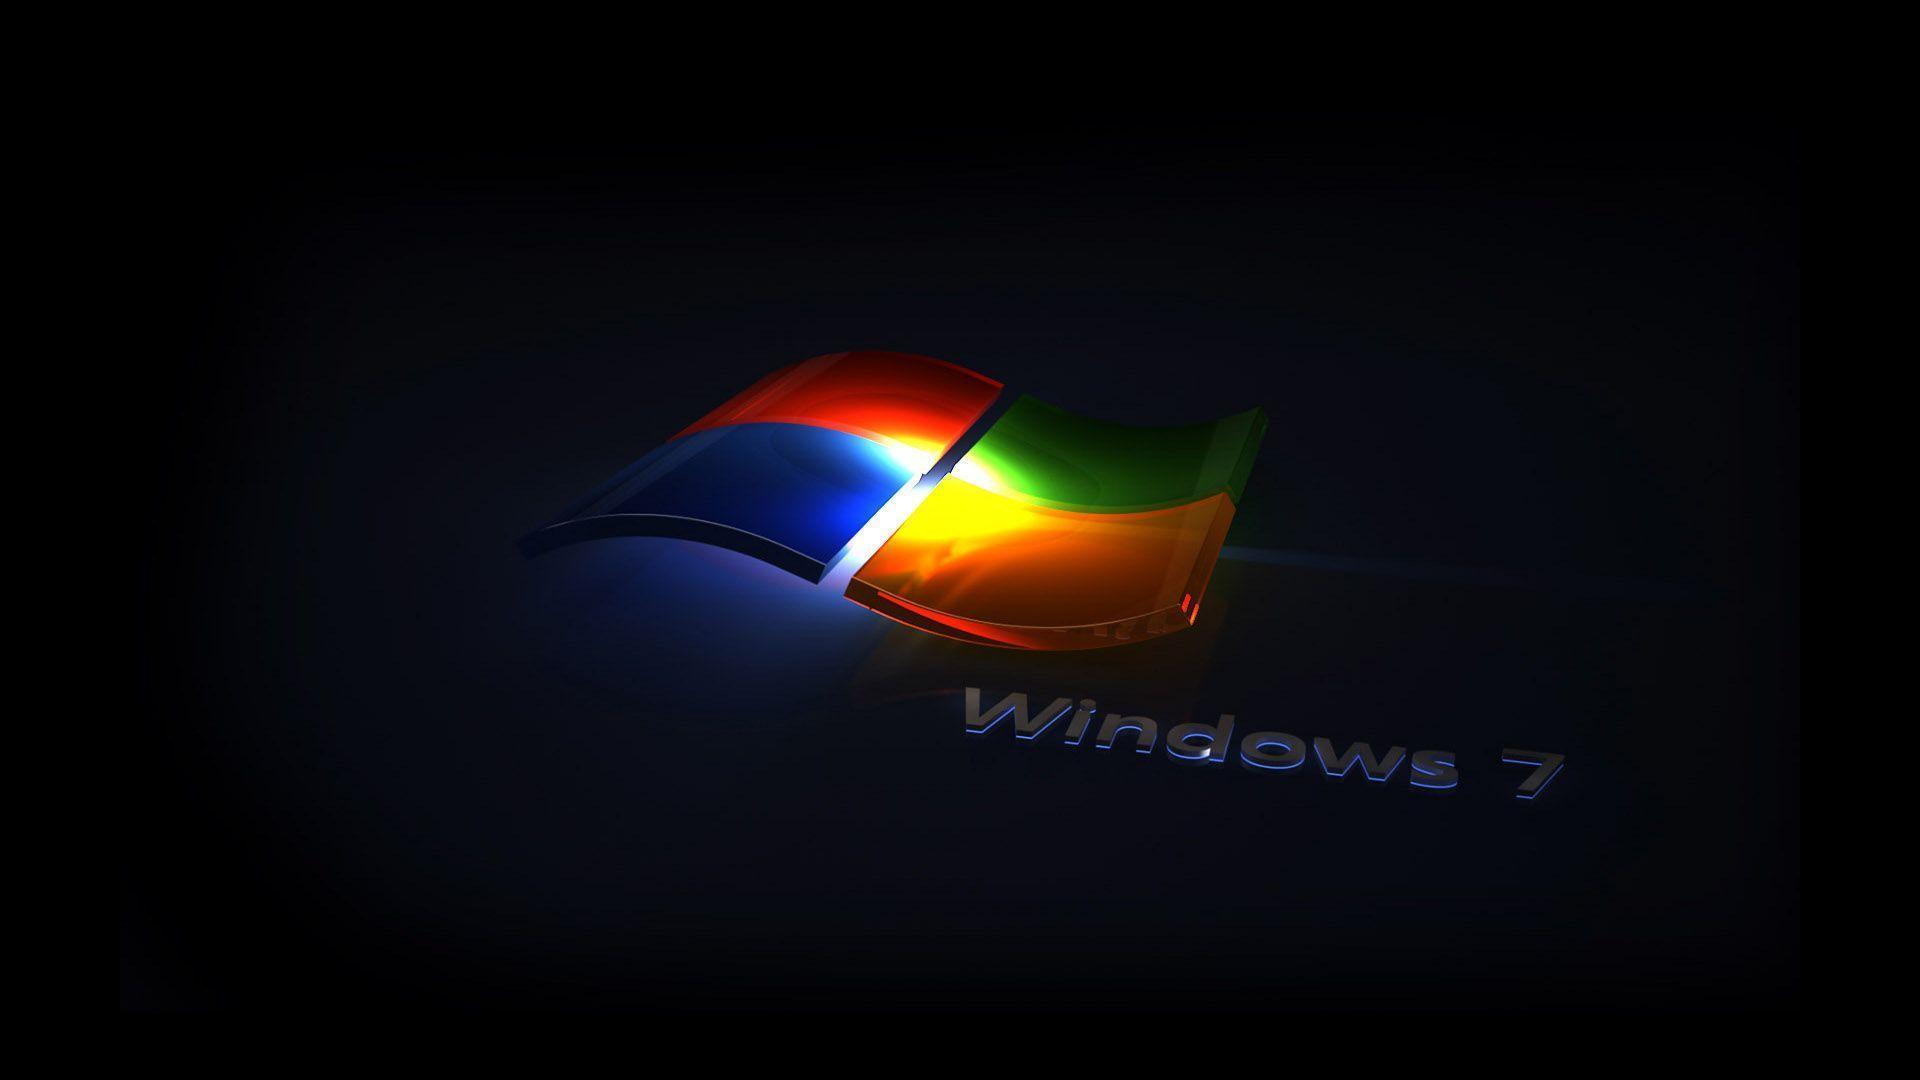 Wallpapers For > Cool Windows Computer Backgrounds